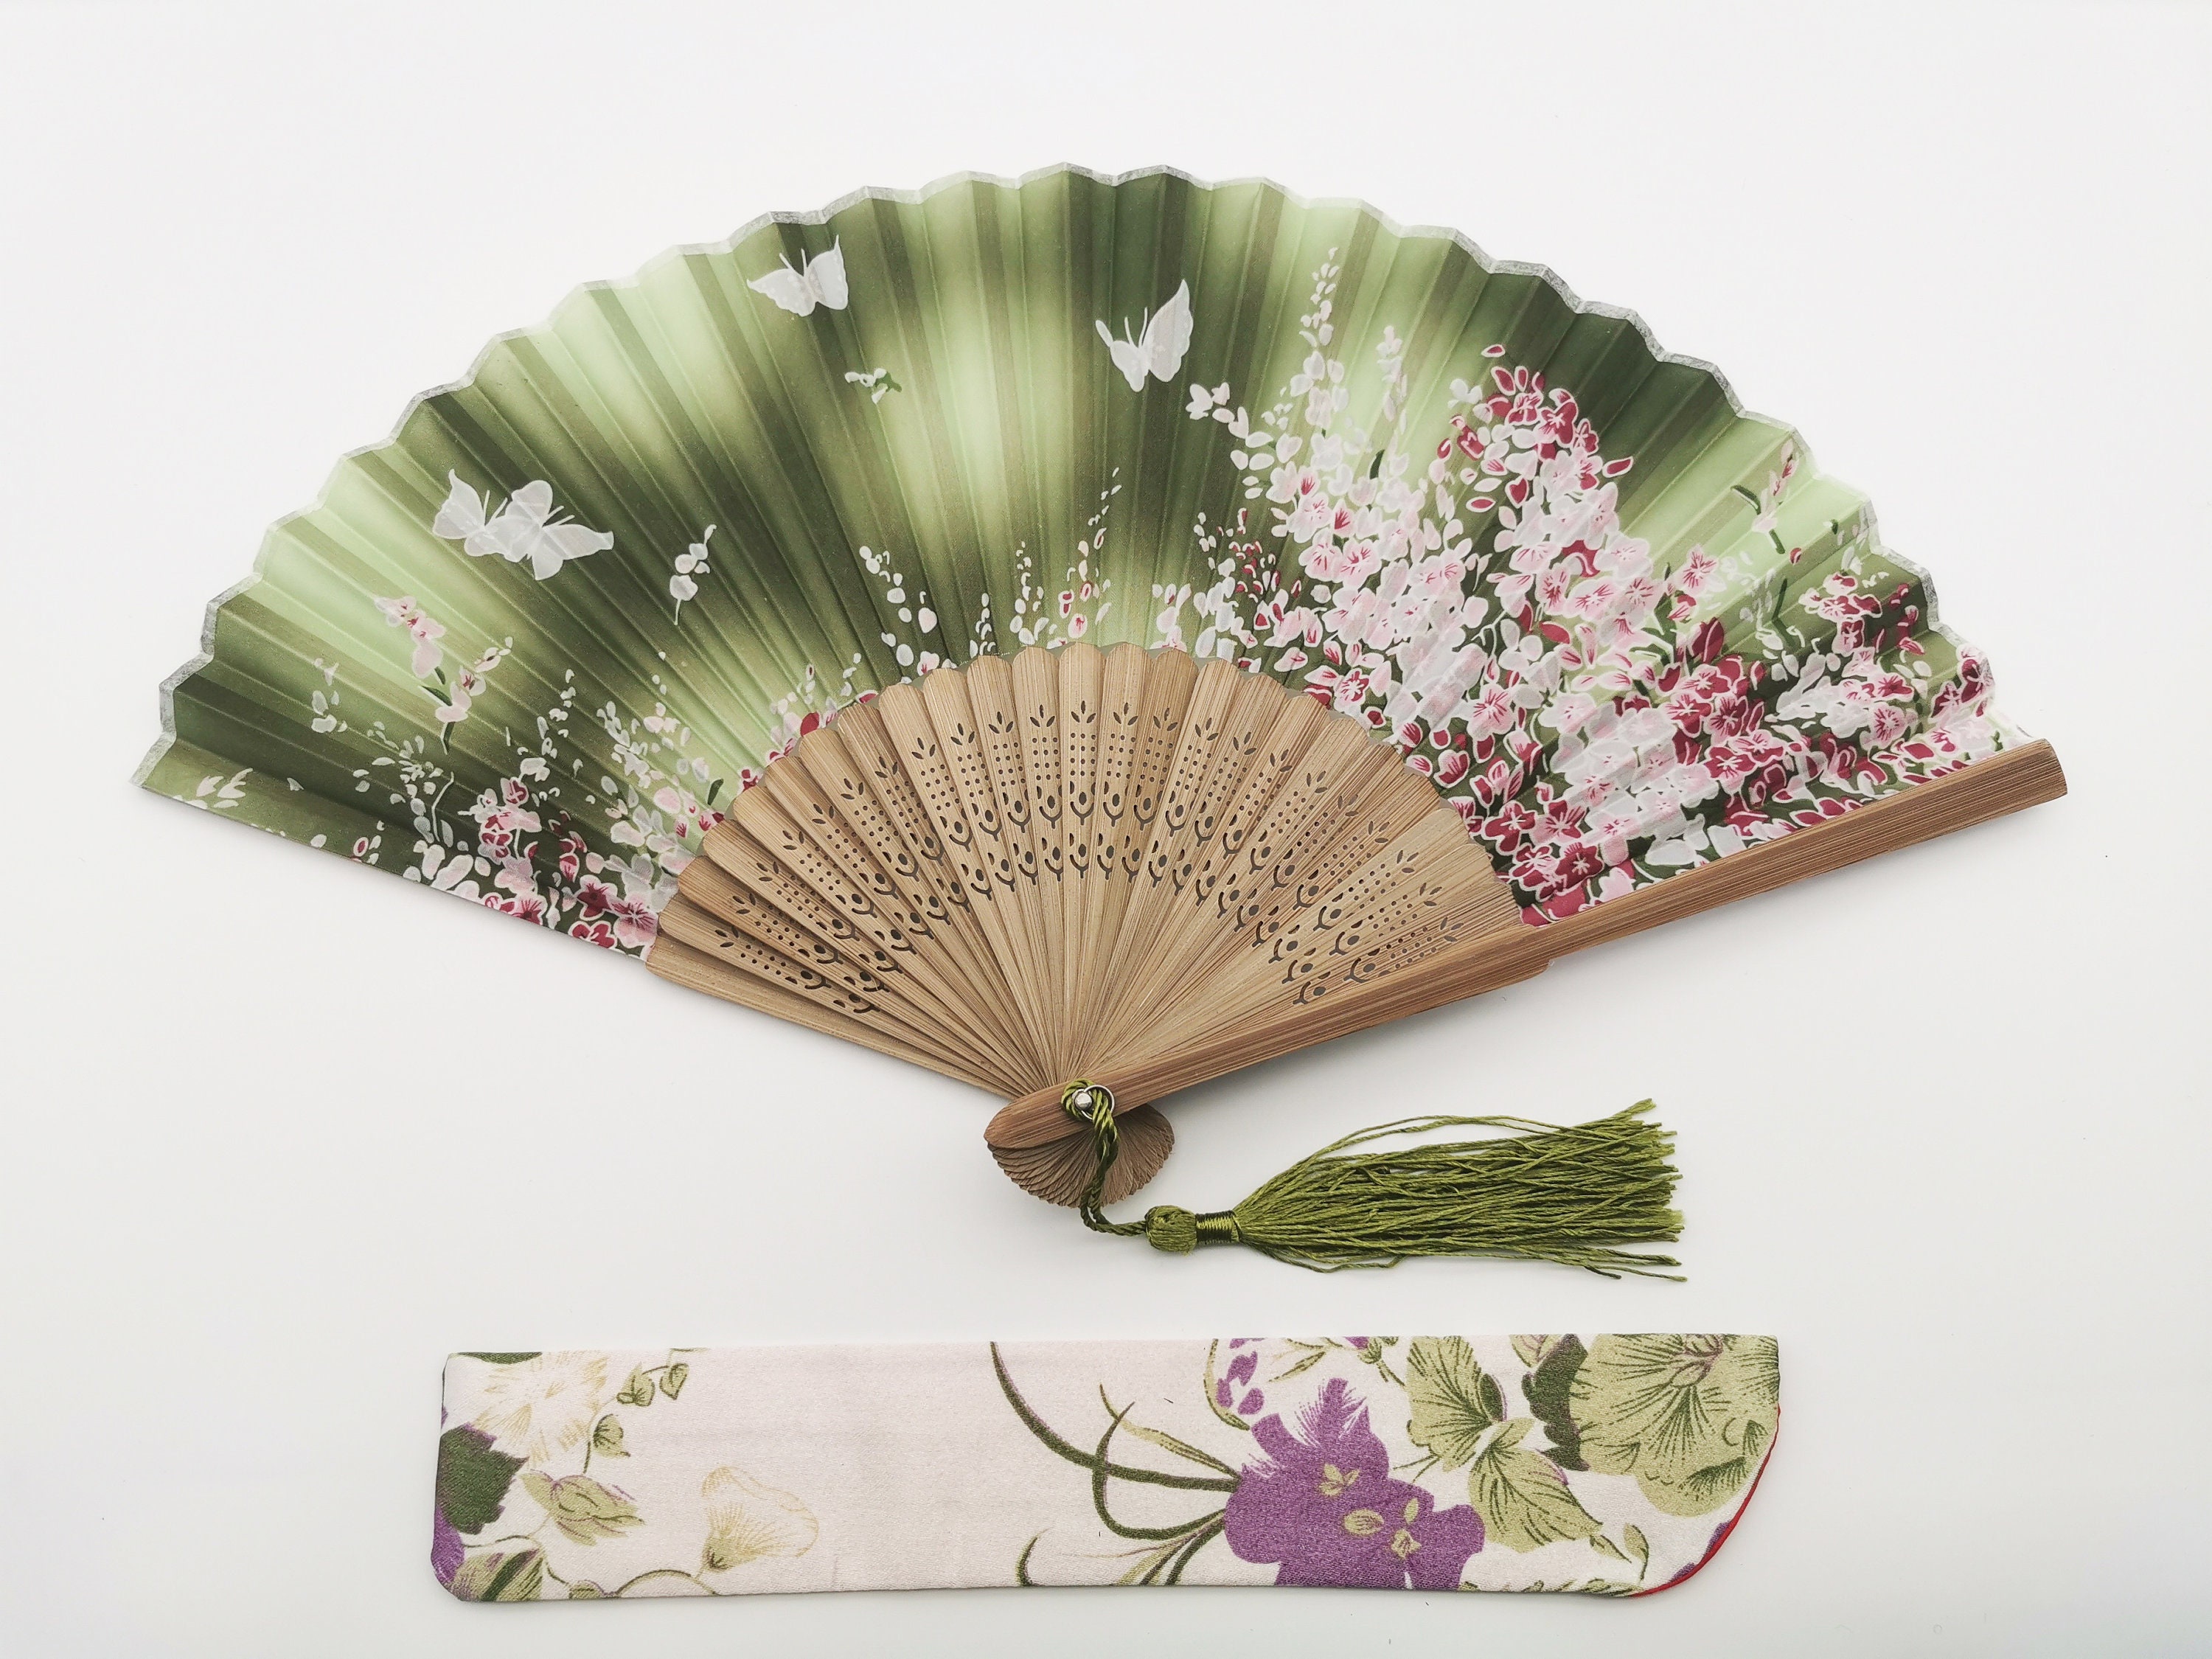 Hot Japanese hand-held Fan Wooden Scented Wedding Party Gift LE P*CA 